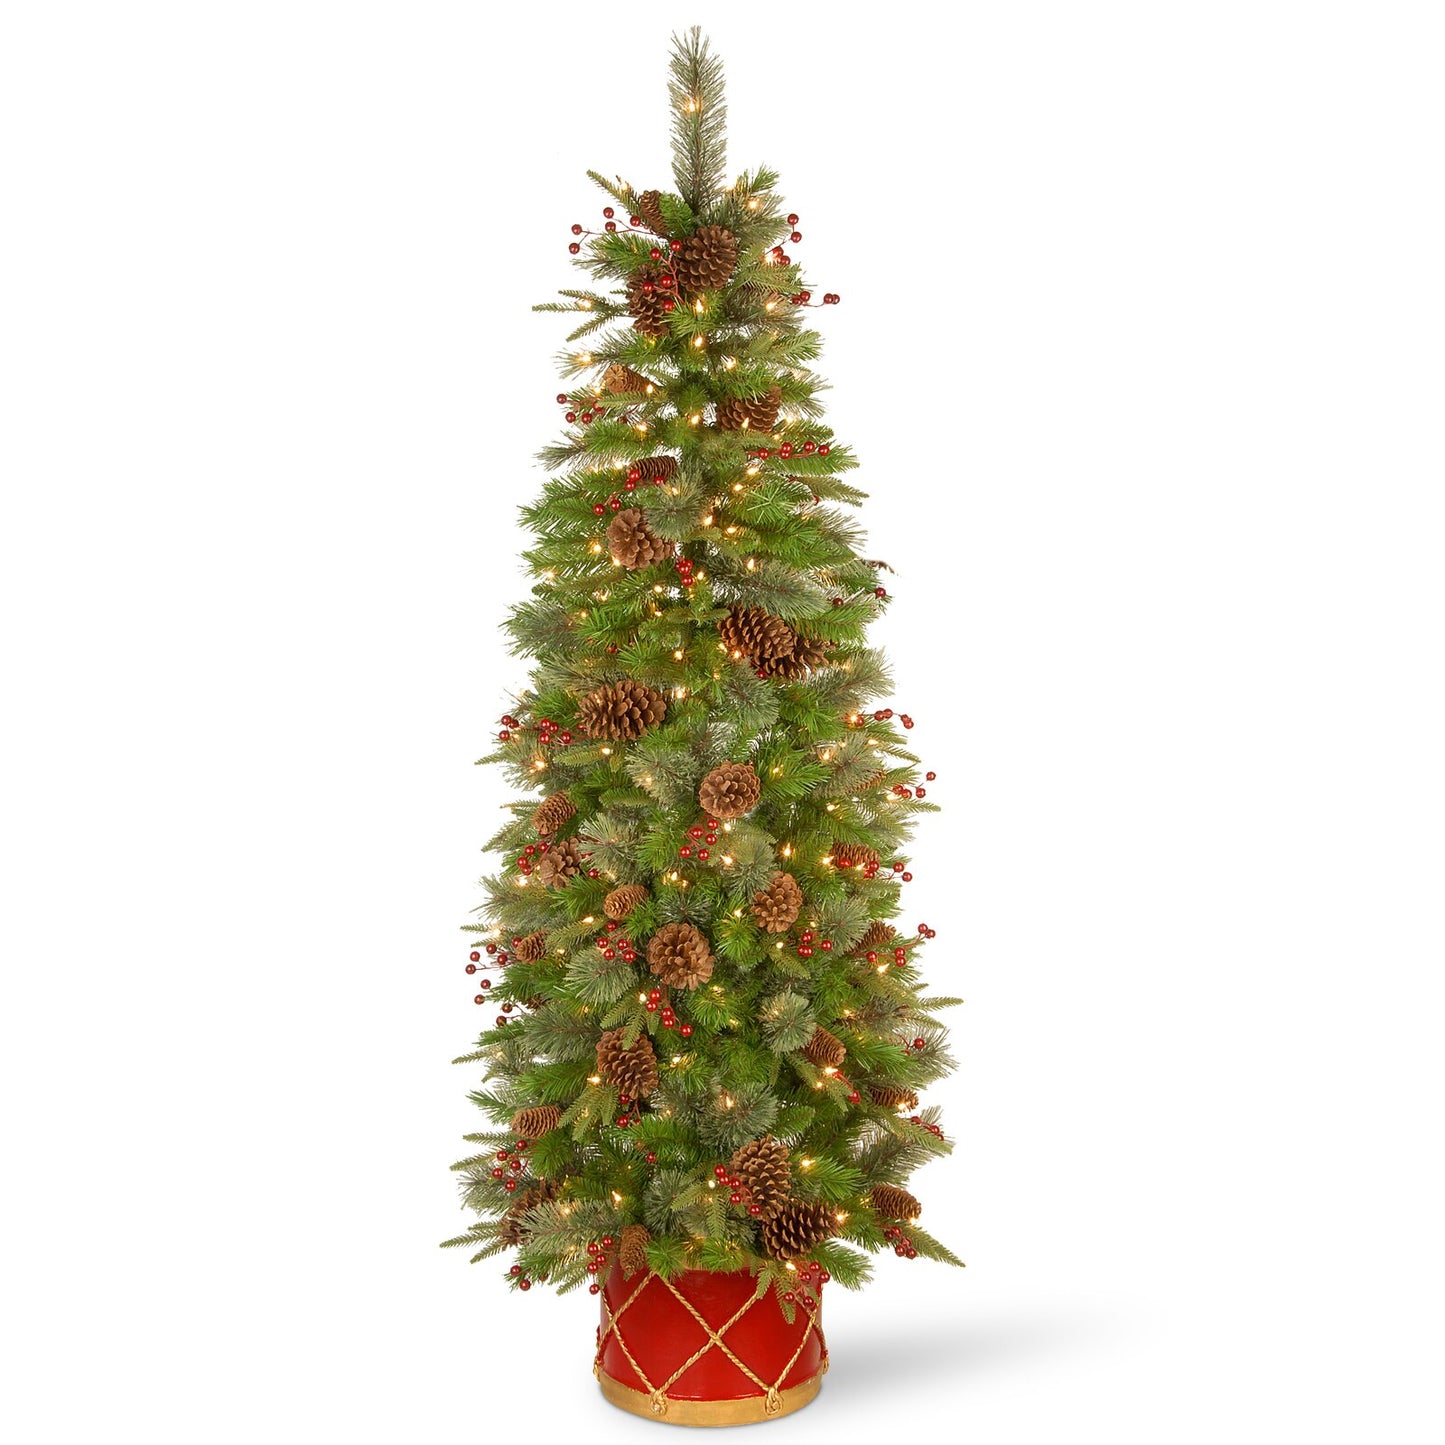 Colonial 6' Green Artificial Christmas Tree with 200 Clear/White Lights